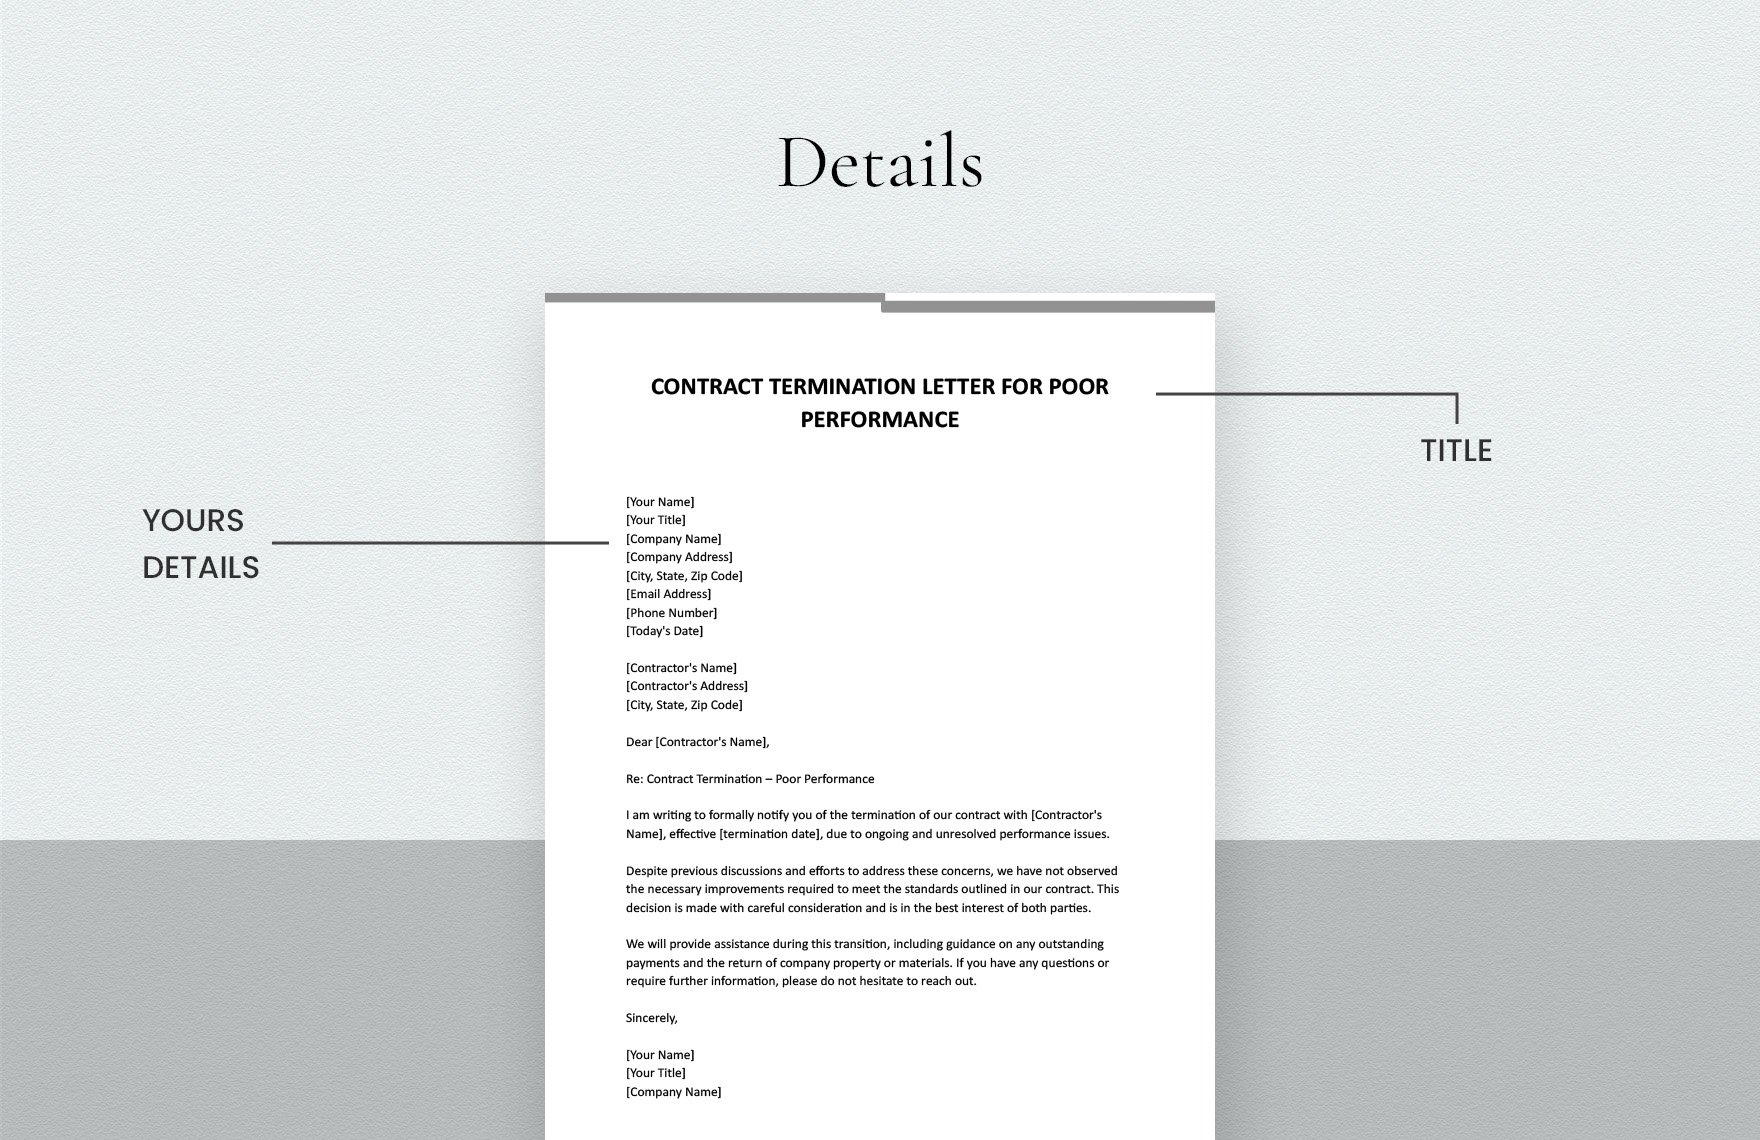 Contract Termination Letter For Poor Performance